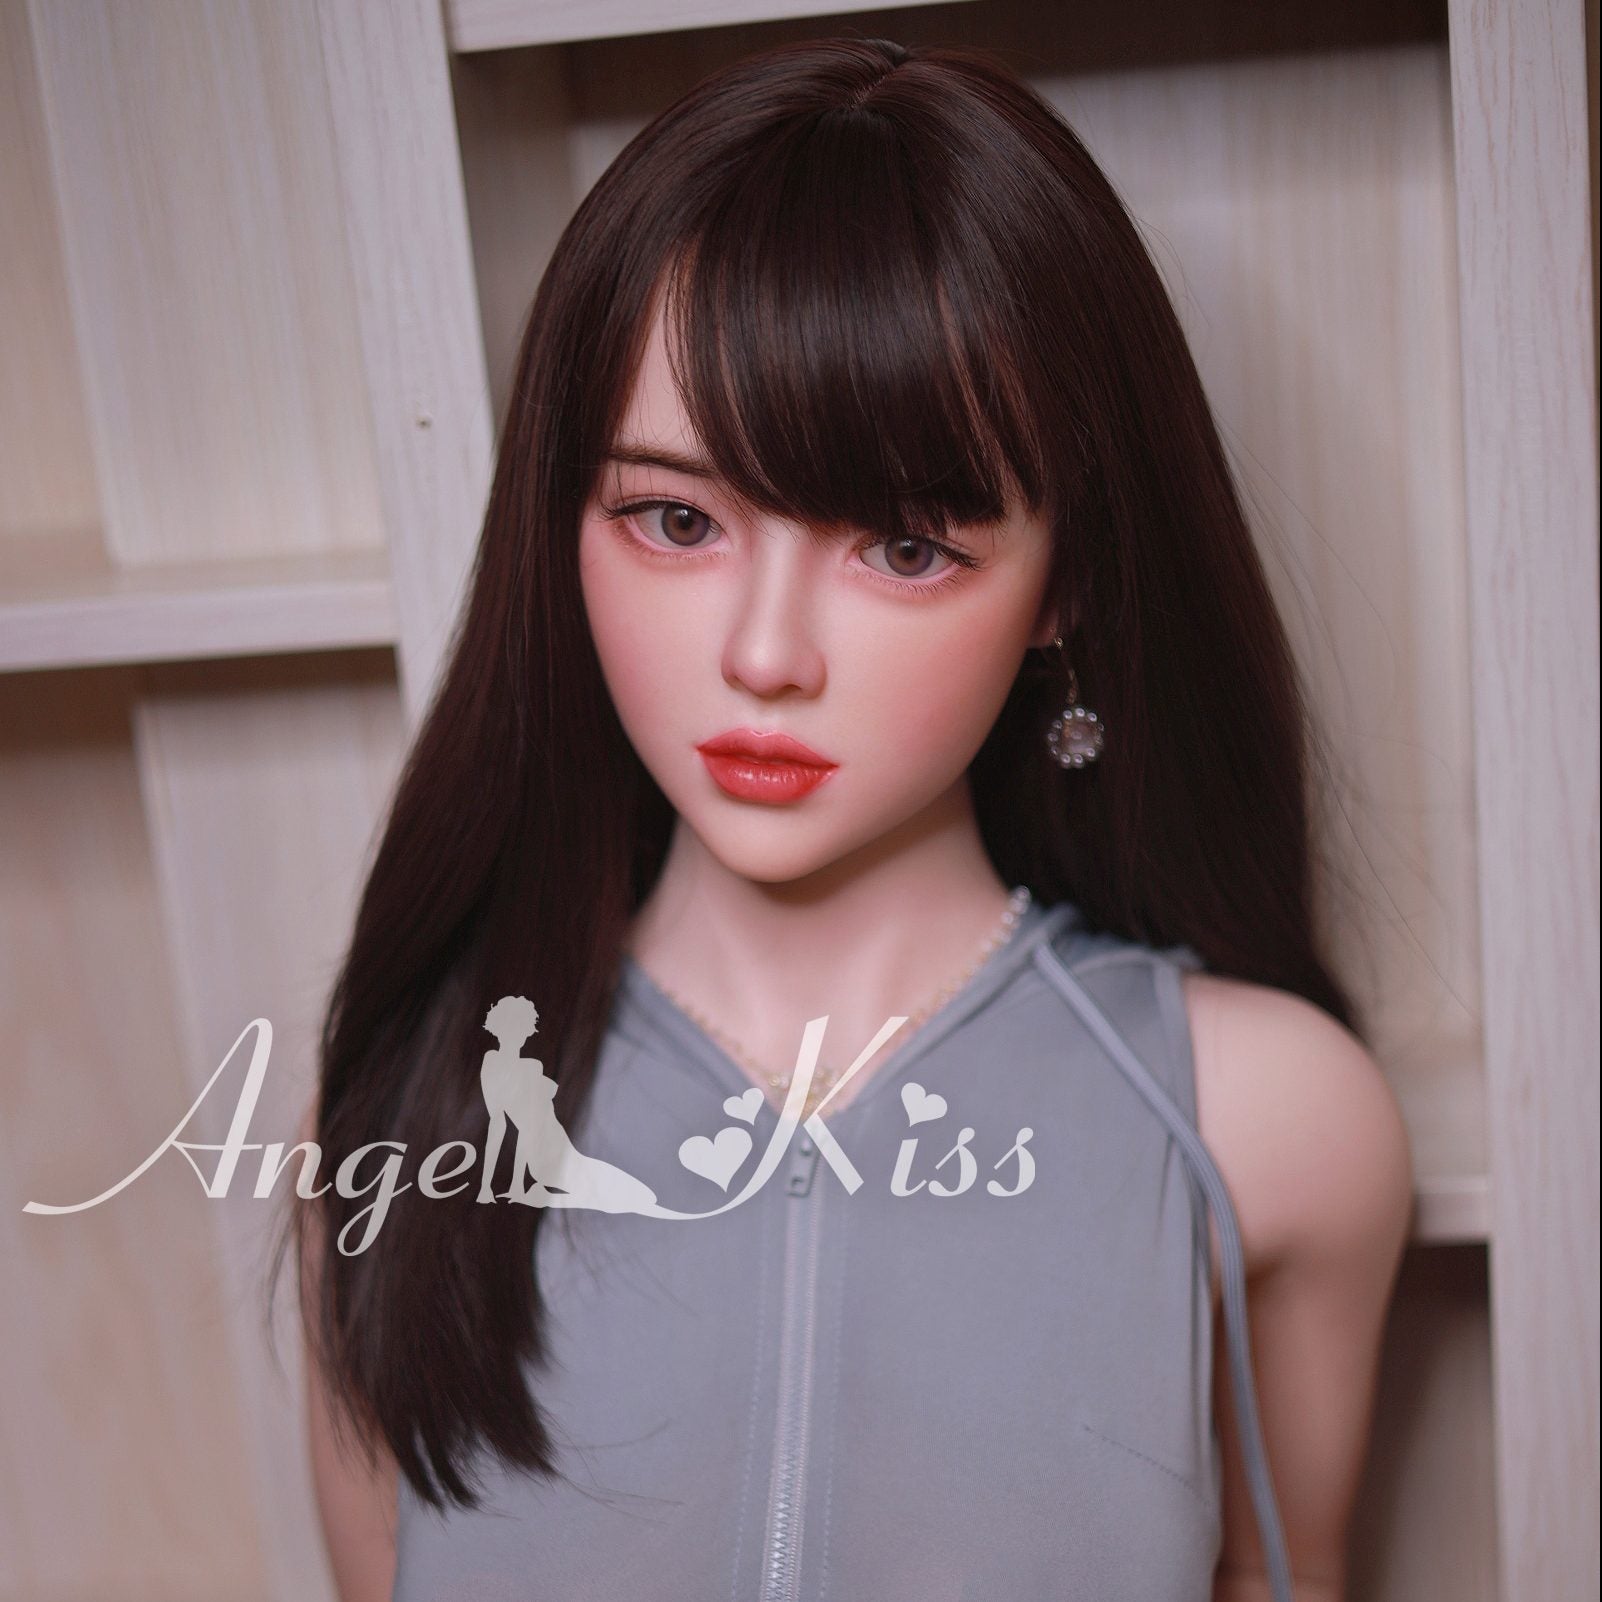 Angelkiss Doll 150 cm Silicone - Ying | Buy Sex Dolls at DOLLS ACTUALLY